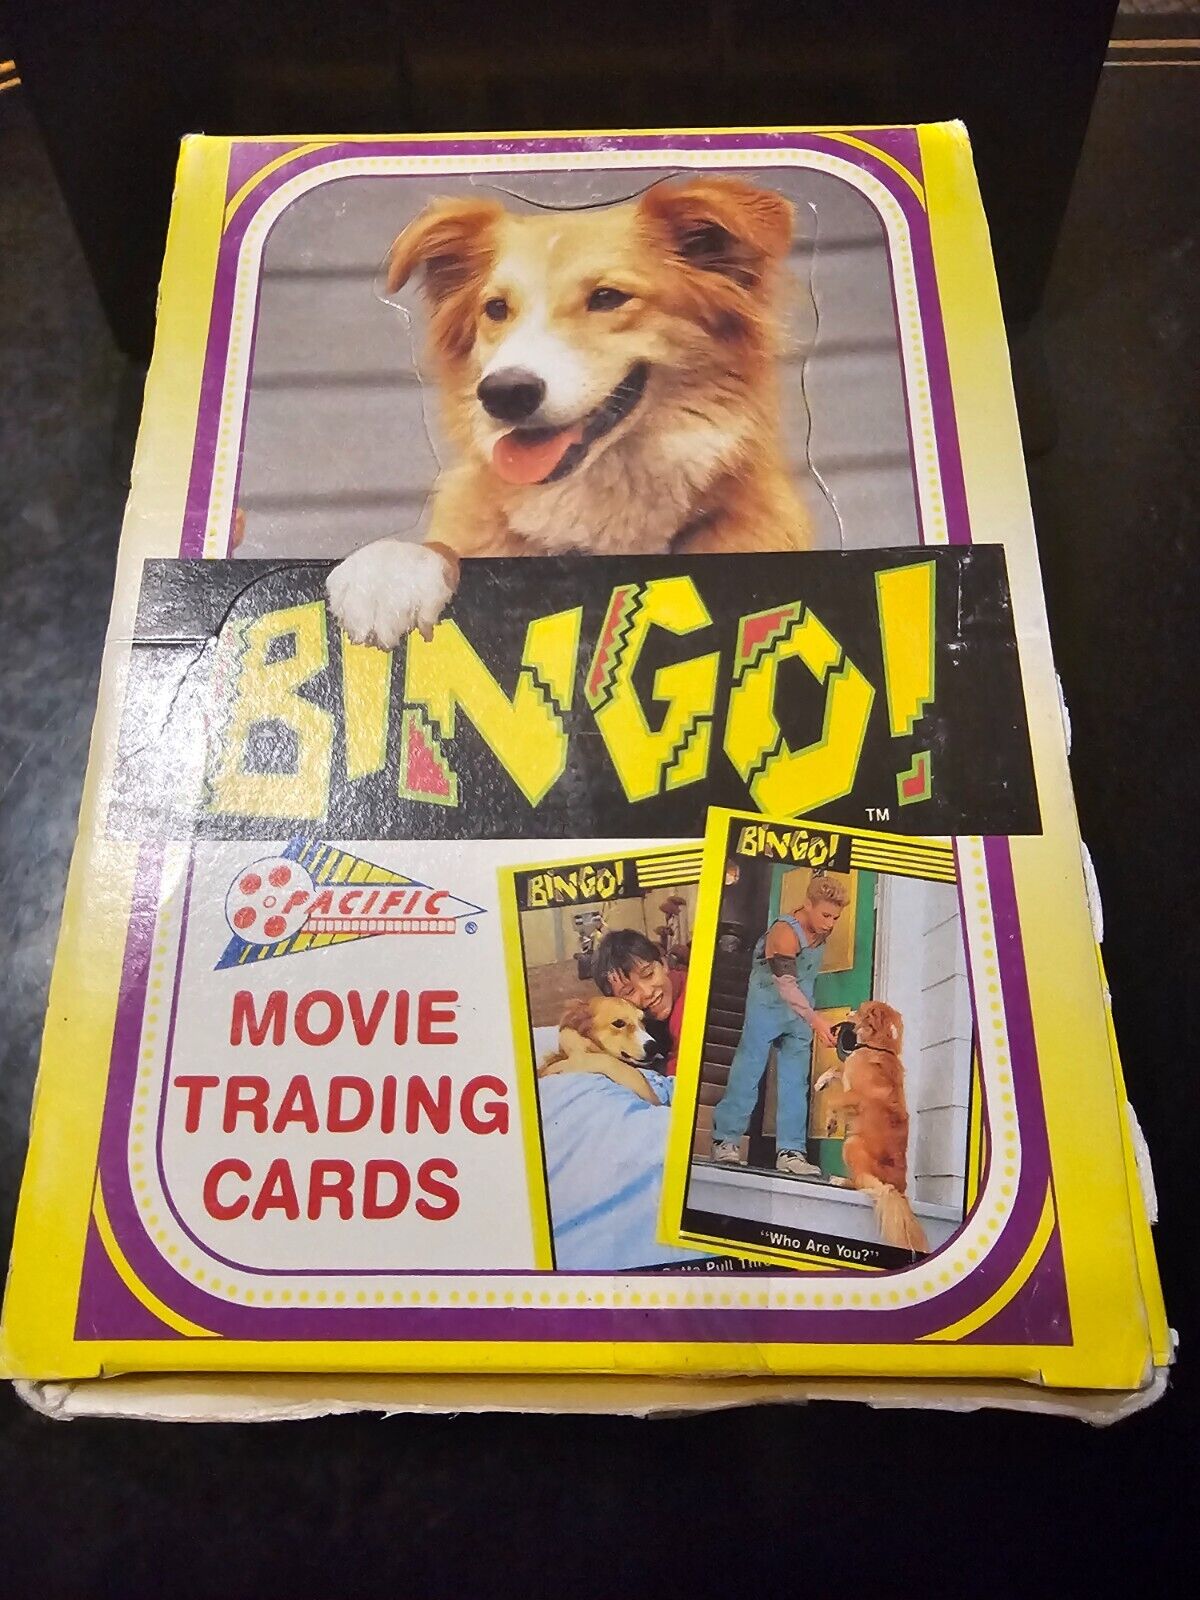 1991 Pacific Bingo Movie Trading Card Box 36 Packs 10 Cards In Each Pack